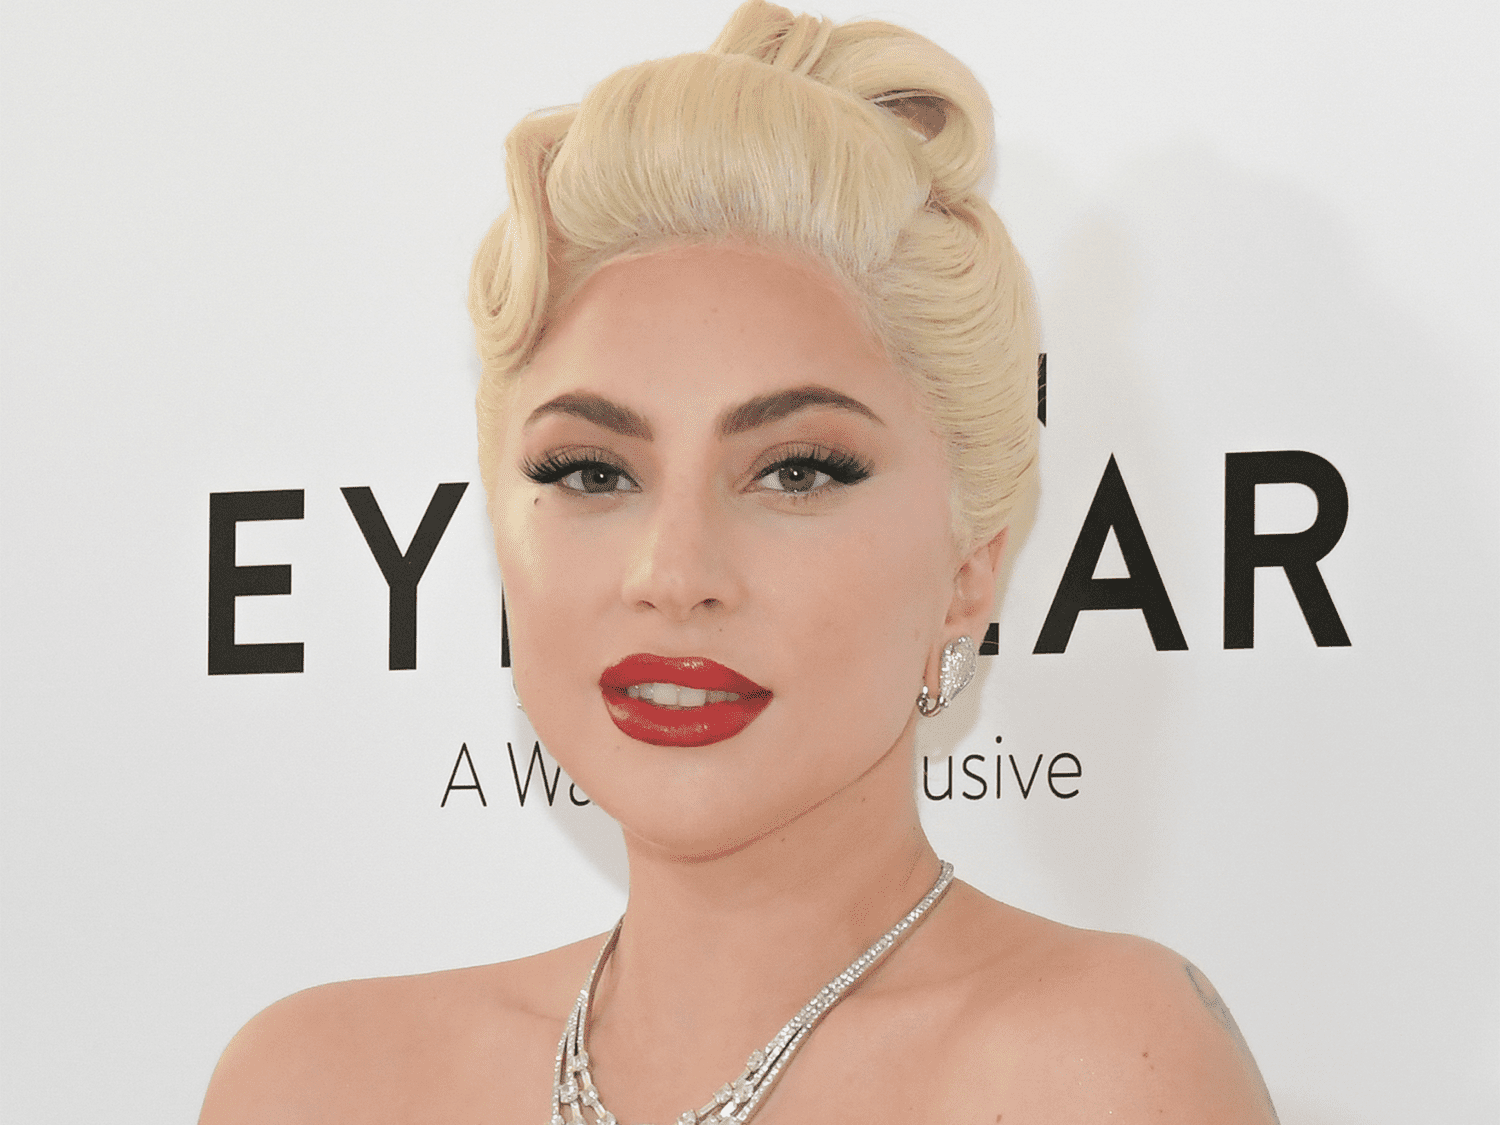 All About Lady Gaga: Height, Weight, Bio, and More